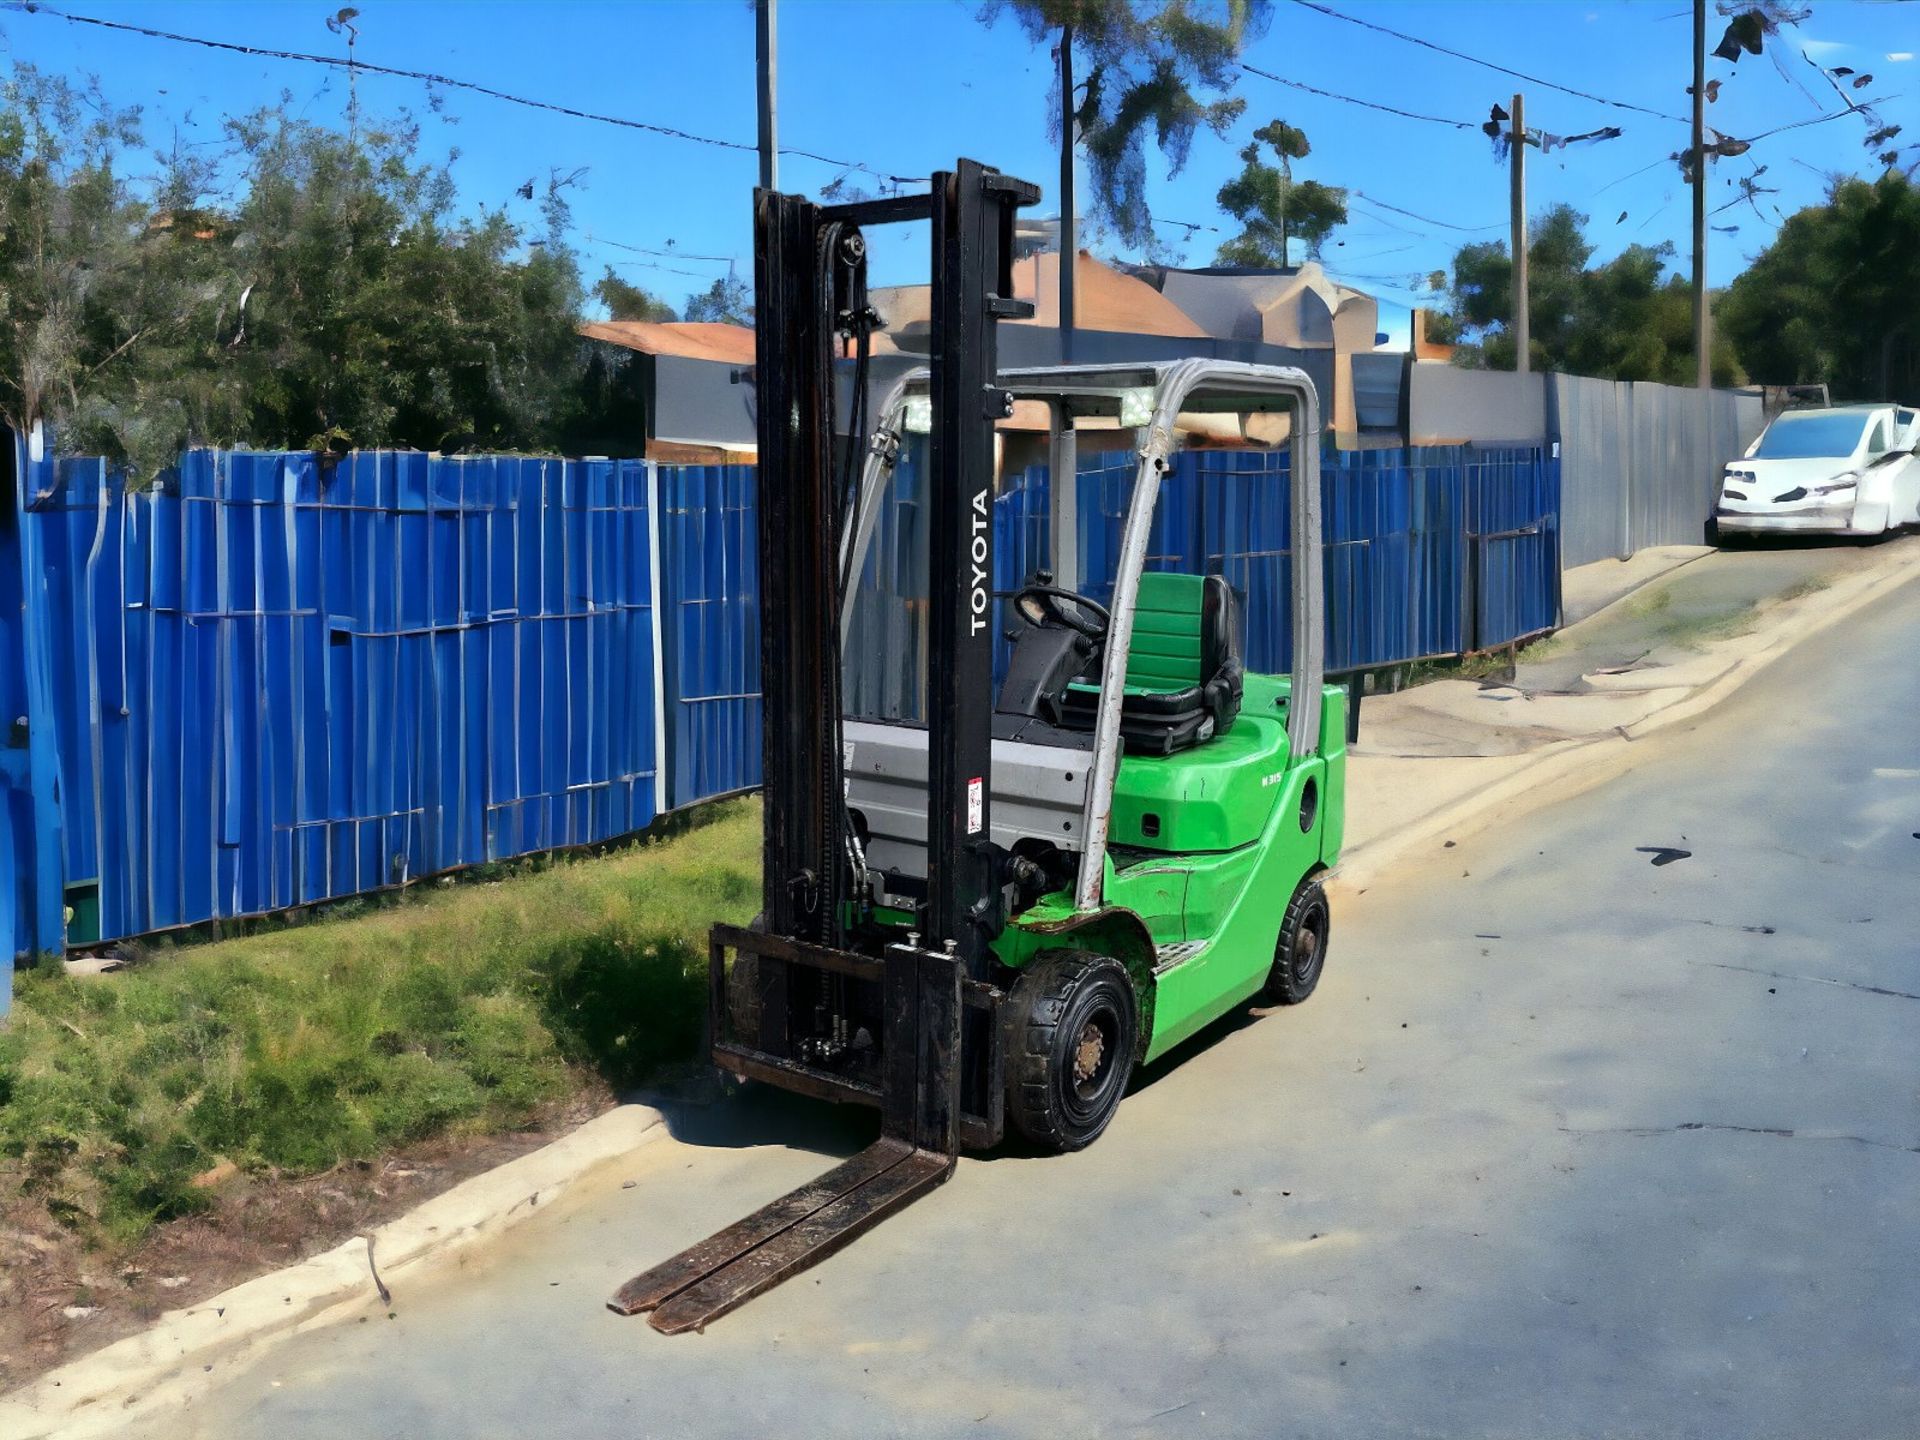 2017 CESAB M315D DIESEL FORKLIFT - RELIABLE PERFORMANCE, EXCEPTIONAL VALUE - Image 7 of 8